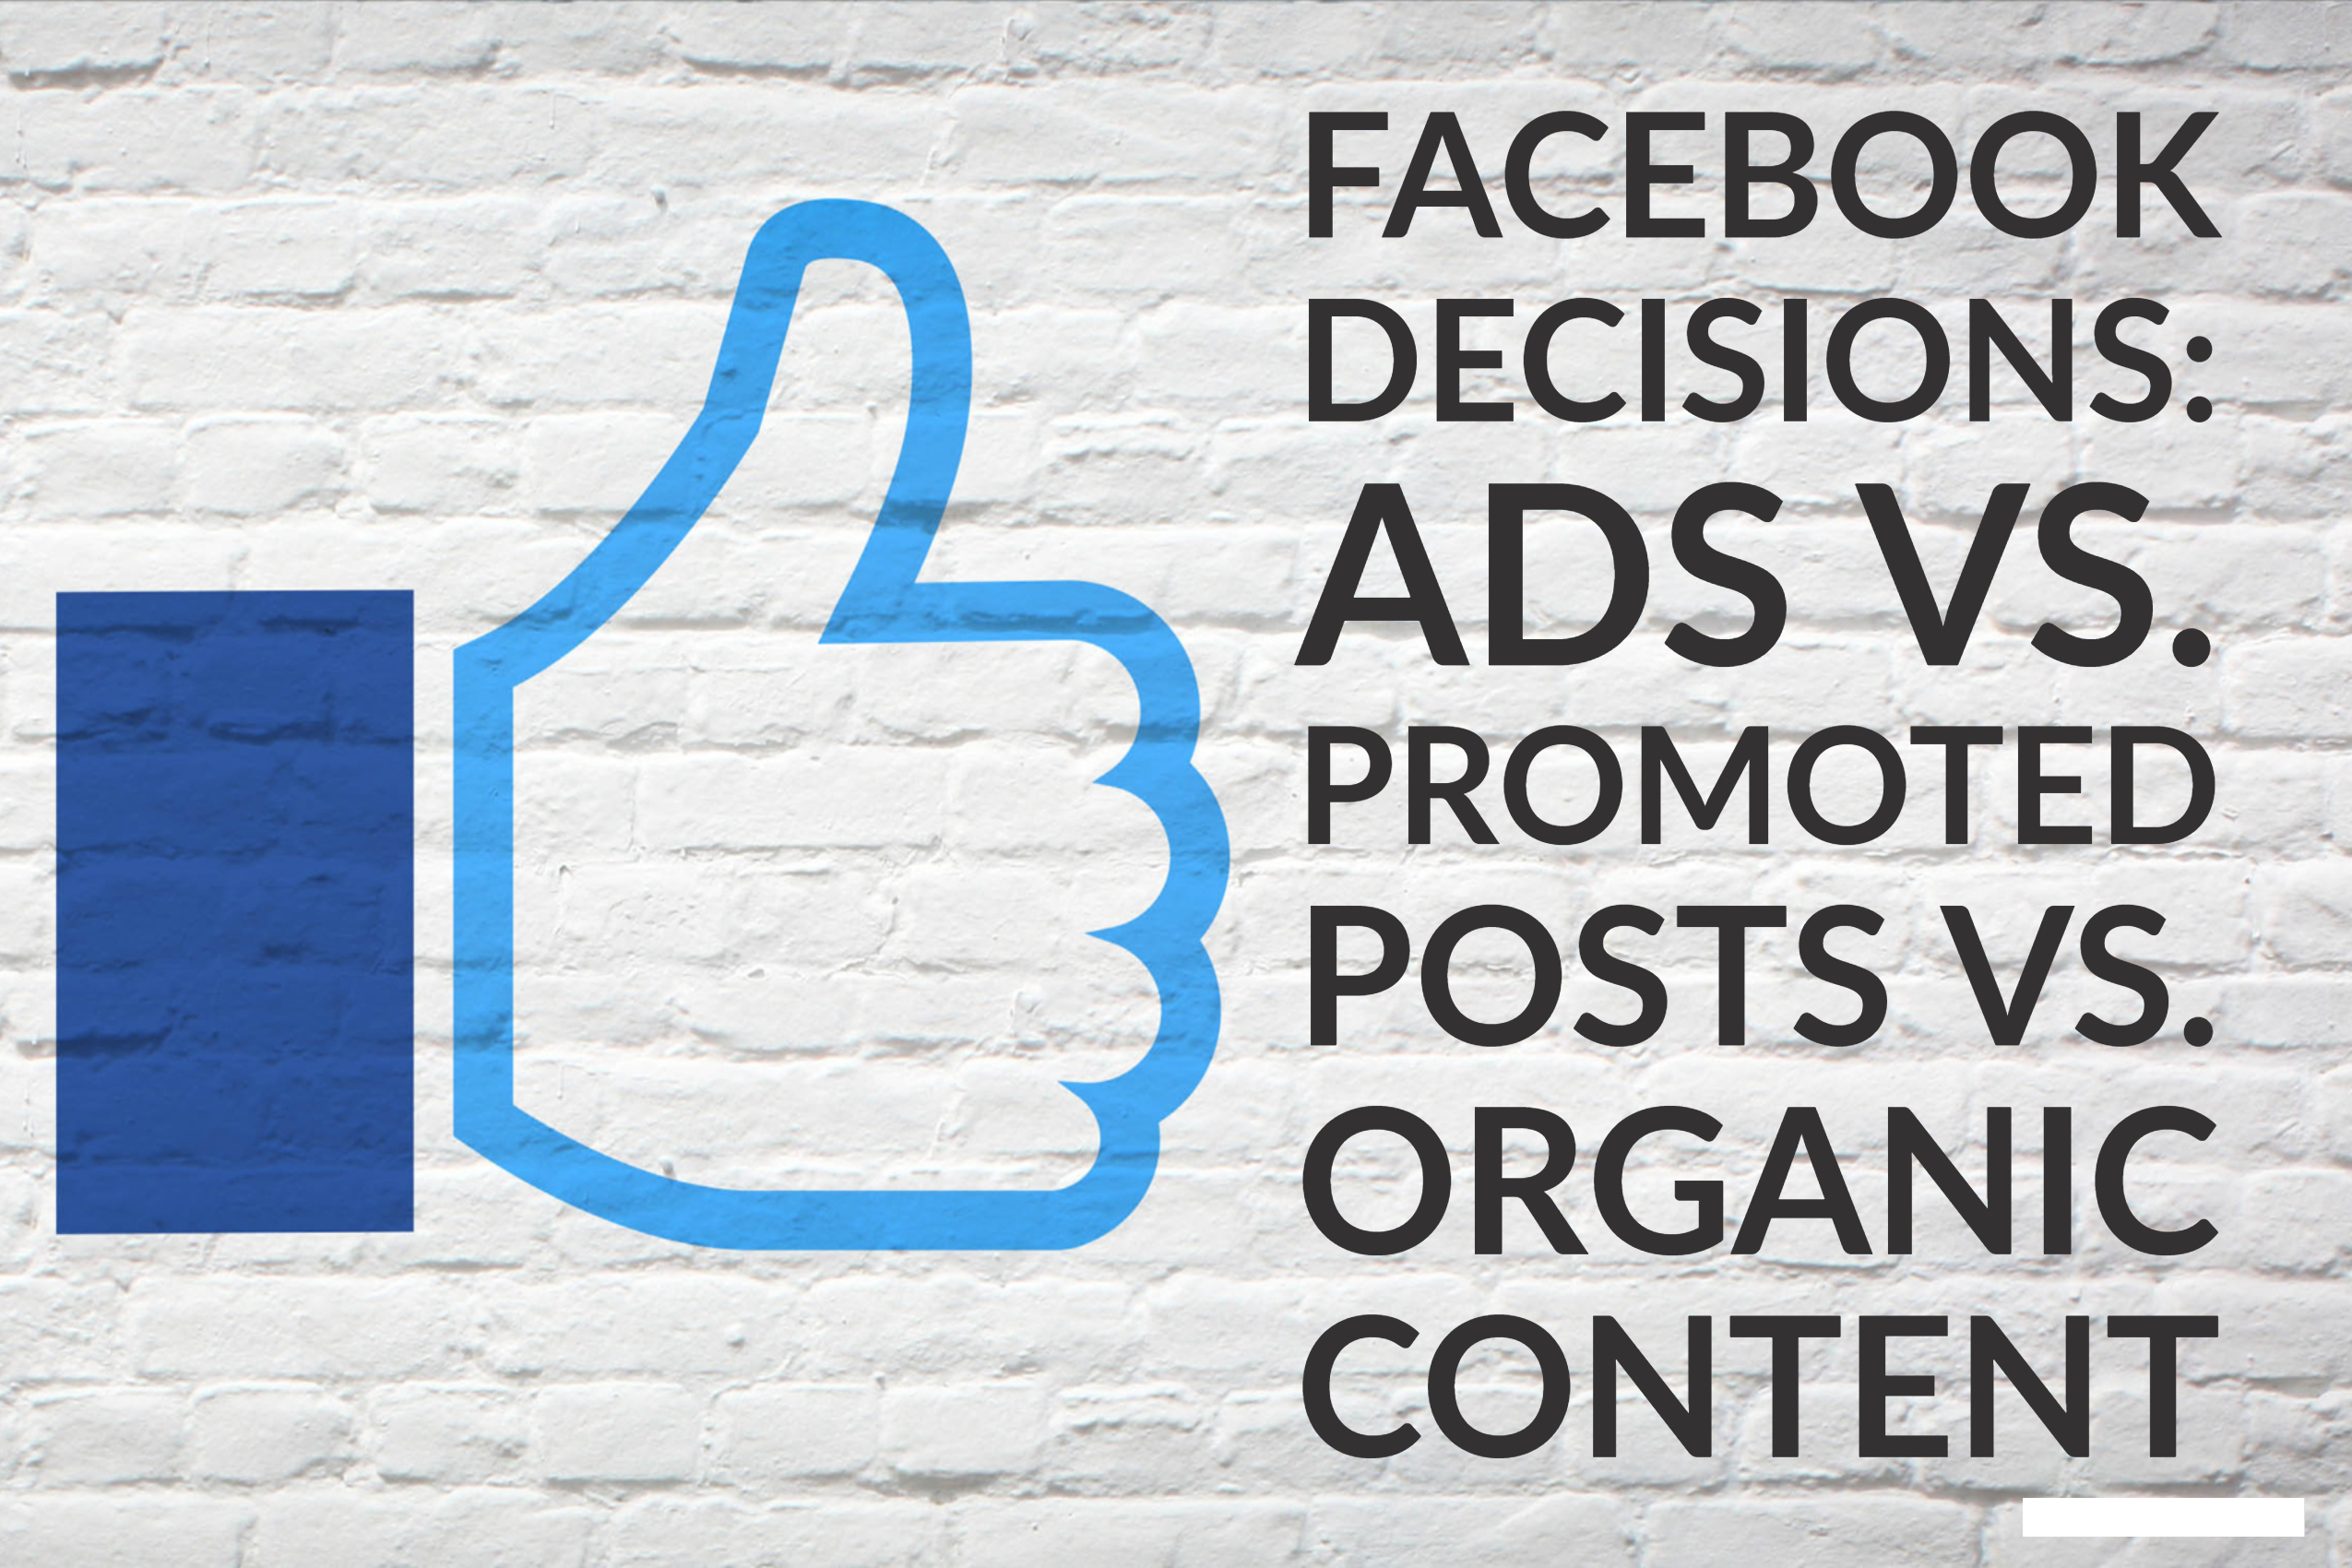 Facebook Decisions: Ads vs. Promoted Posts vs. Organic Content